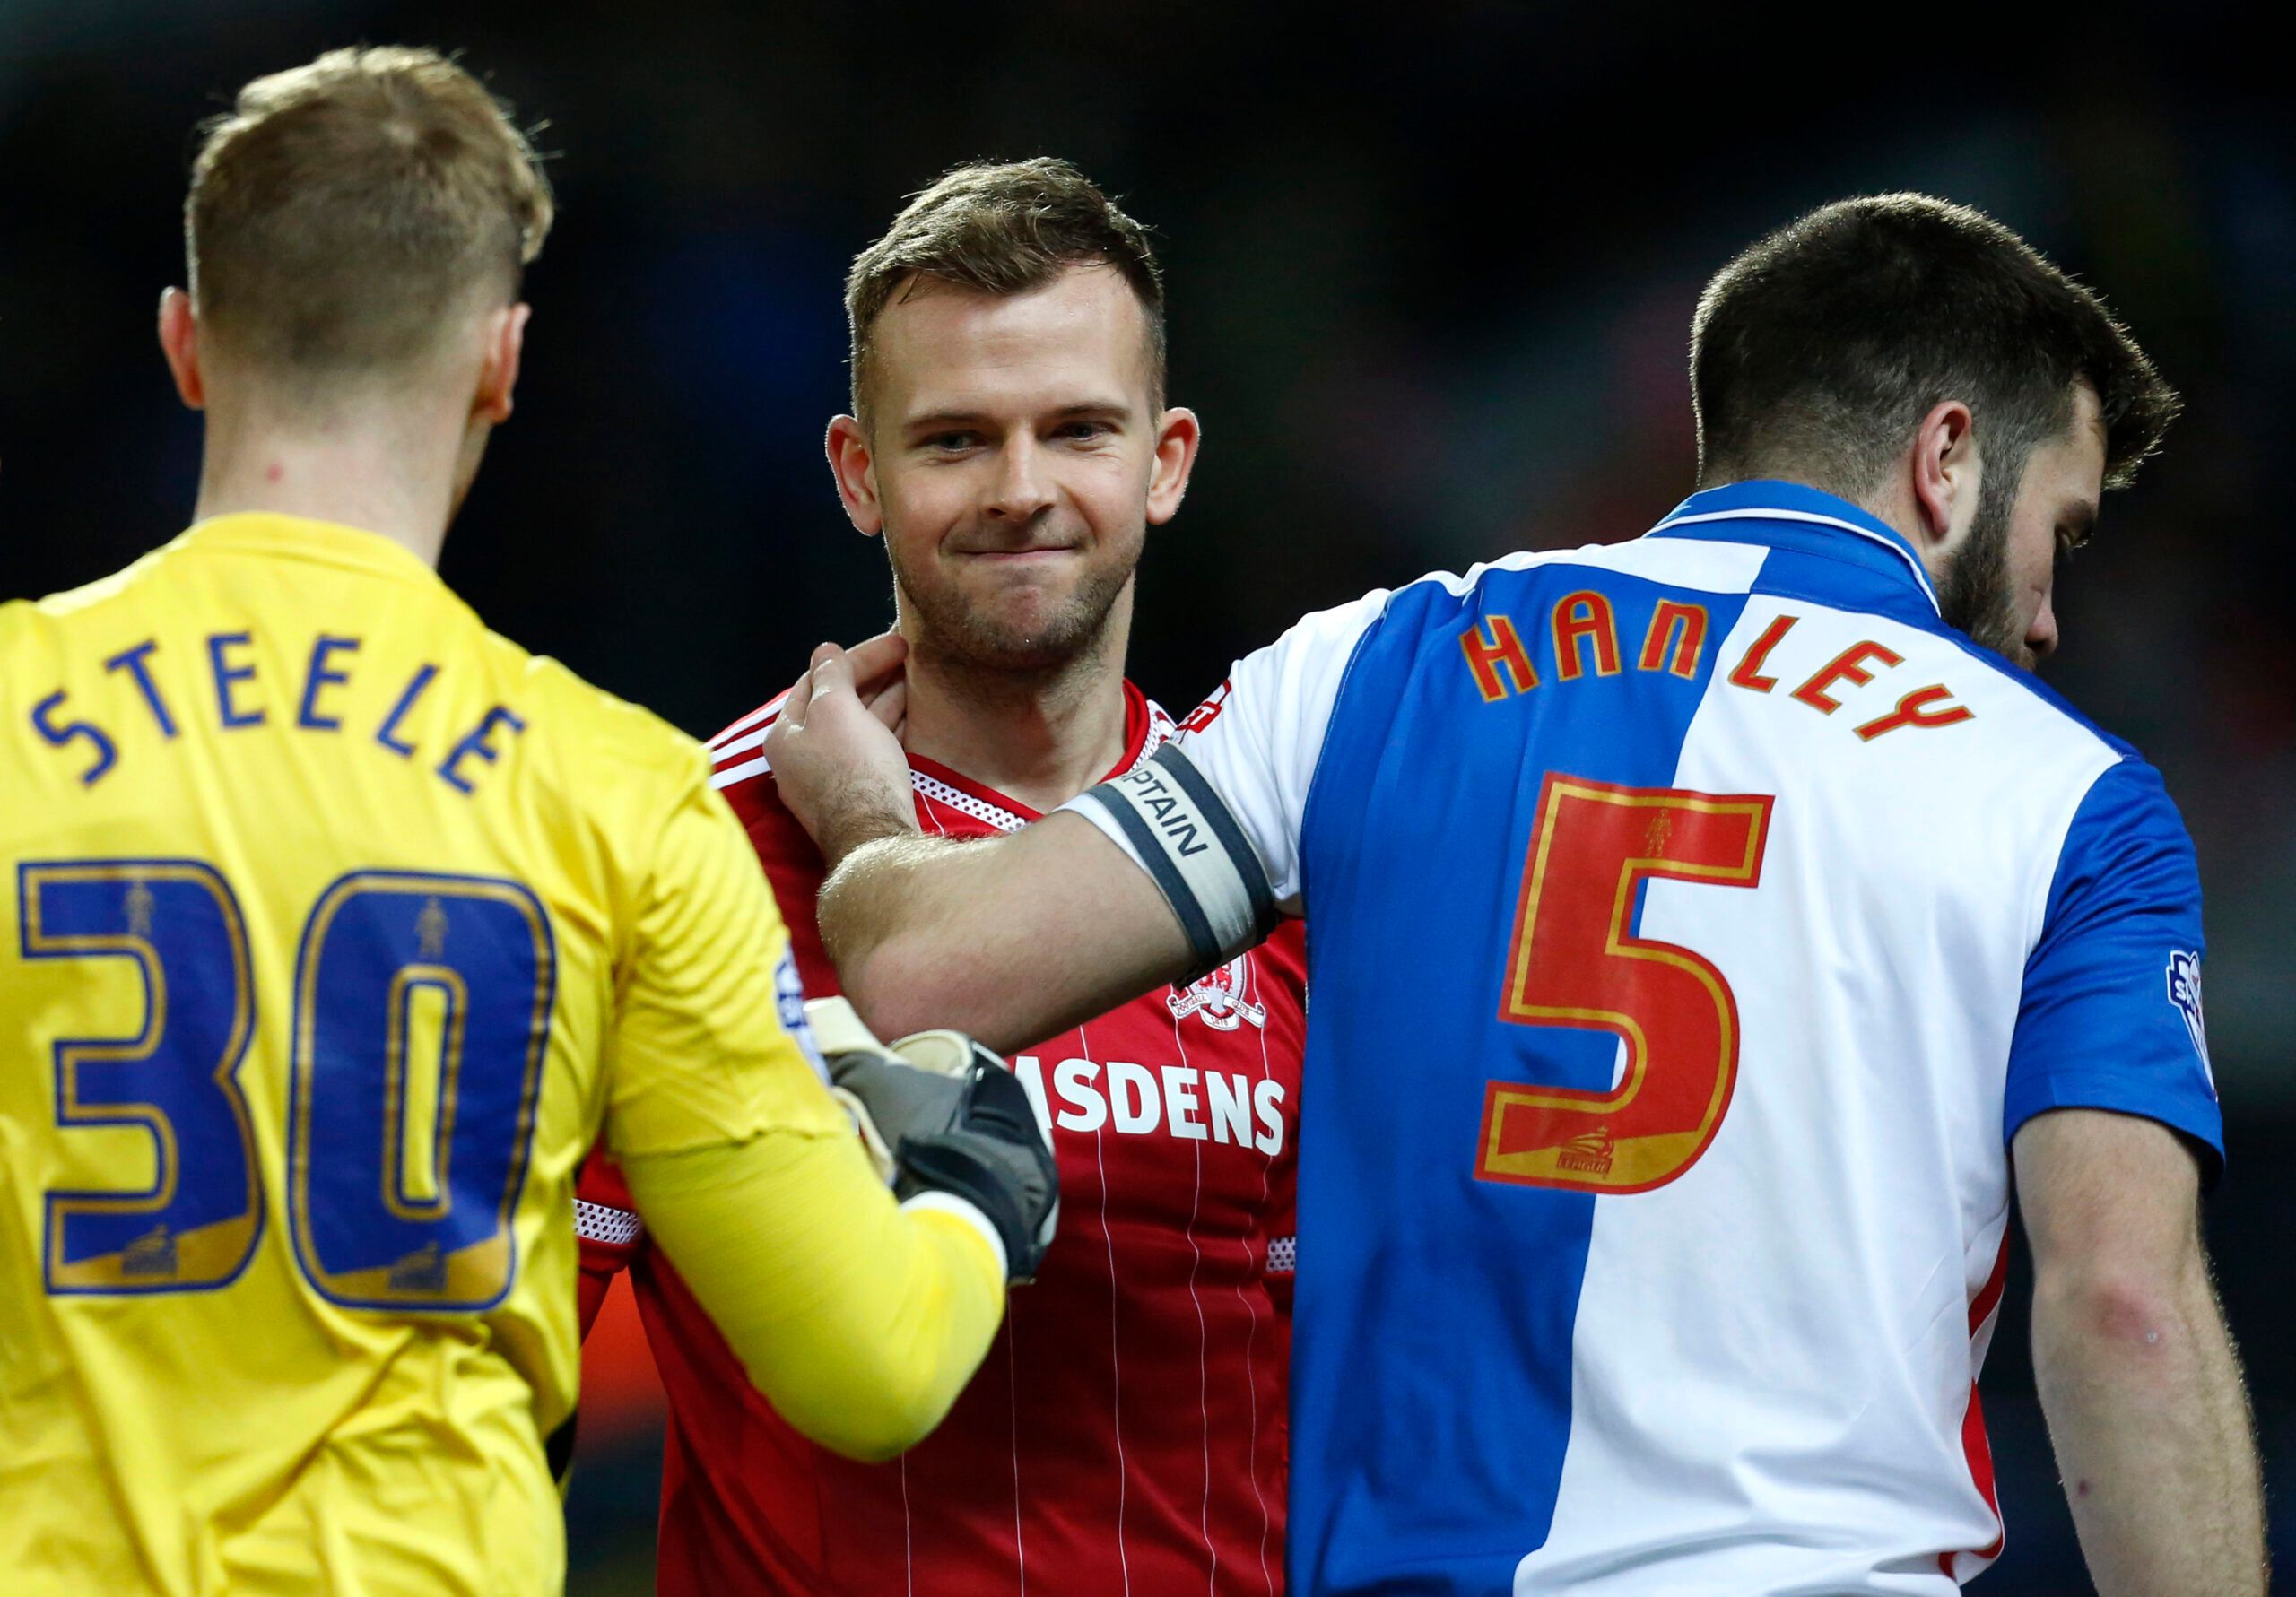 Football Soccer - Blackburn Rovers v Middlesbrough - Sky Bet Football League Championship - Ewood Park - 1/3/16 
Jordan Rhodes of Middlesbrough with Jason Steele and Grant Hanley of Blackburn Rovers before the game 
Mandatory Credit: Action Images / Ed Sykes 
Livepic 
EDITORIAL USE ONLY. No use with unauthorized audio, video, data, fixture lists, club/league logos or 